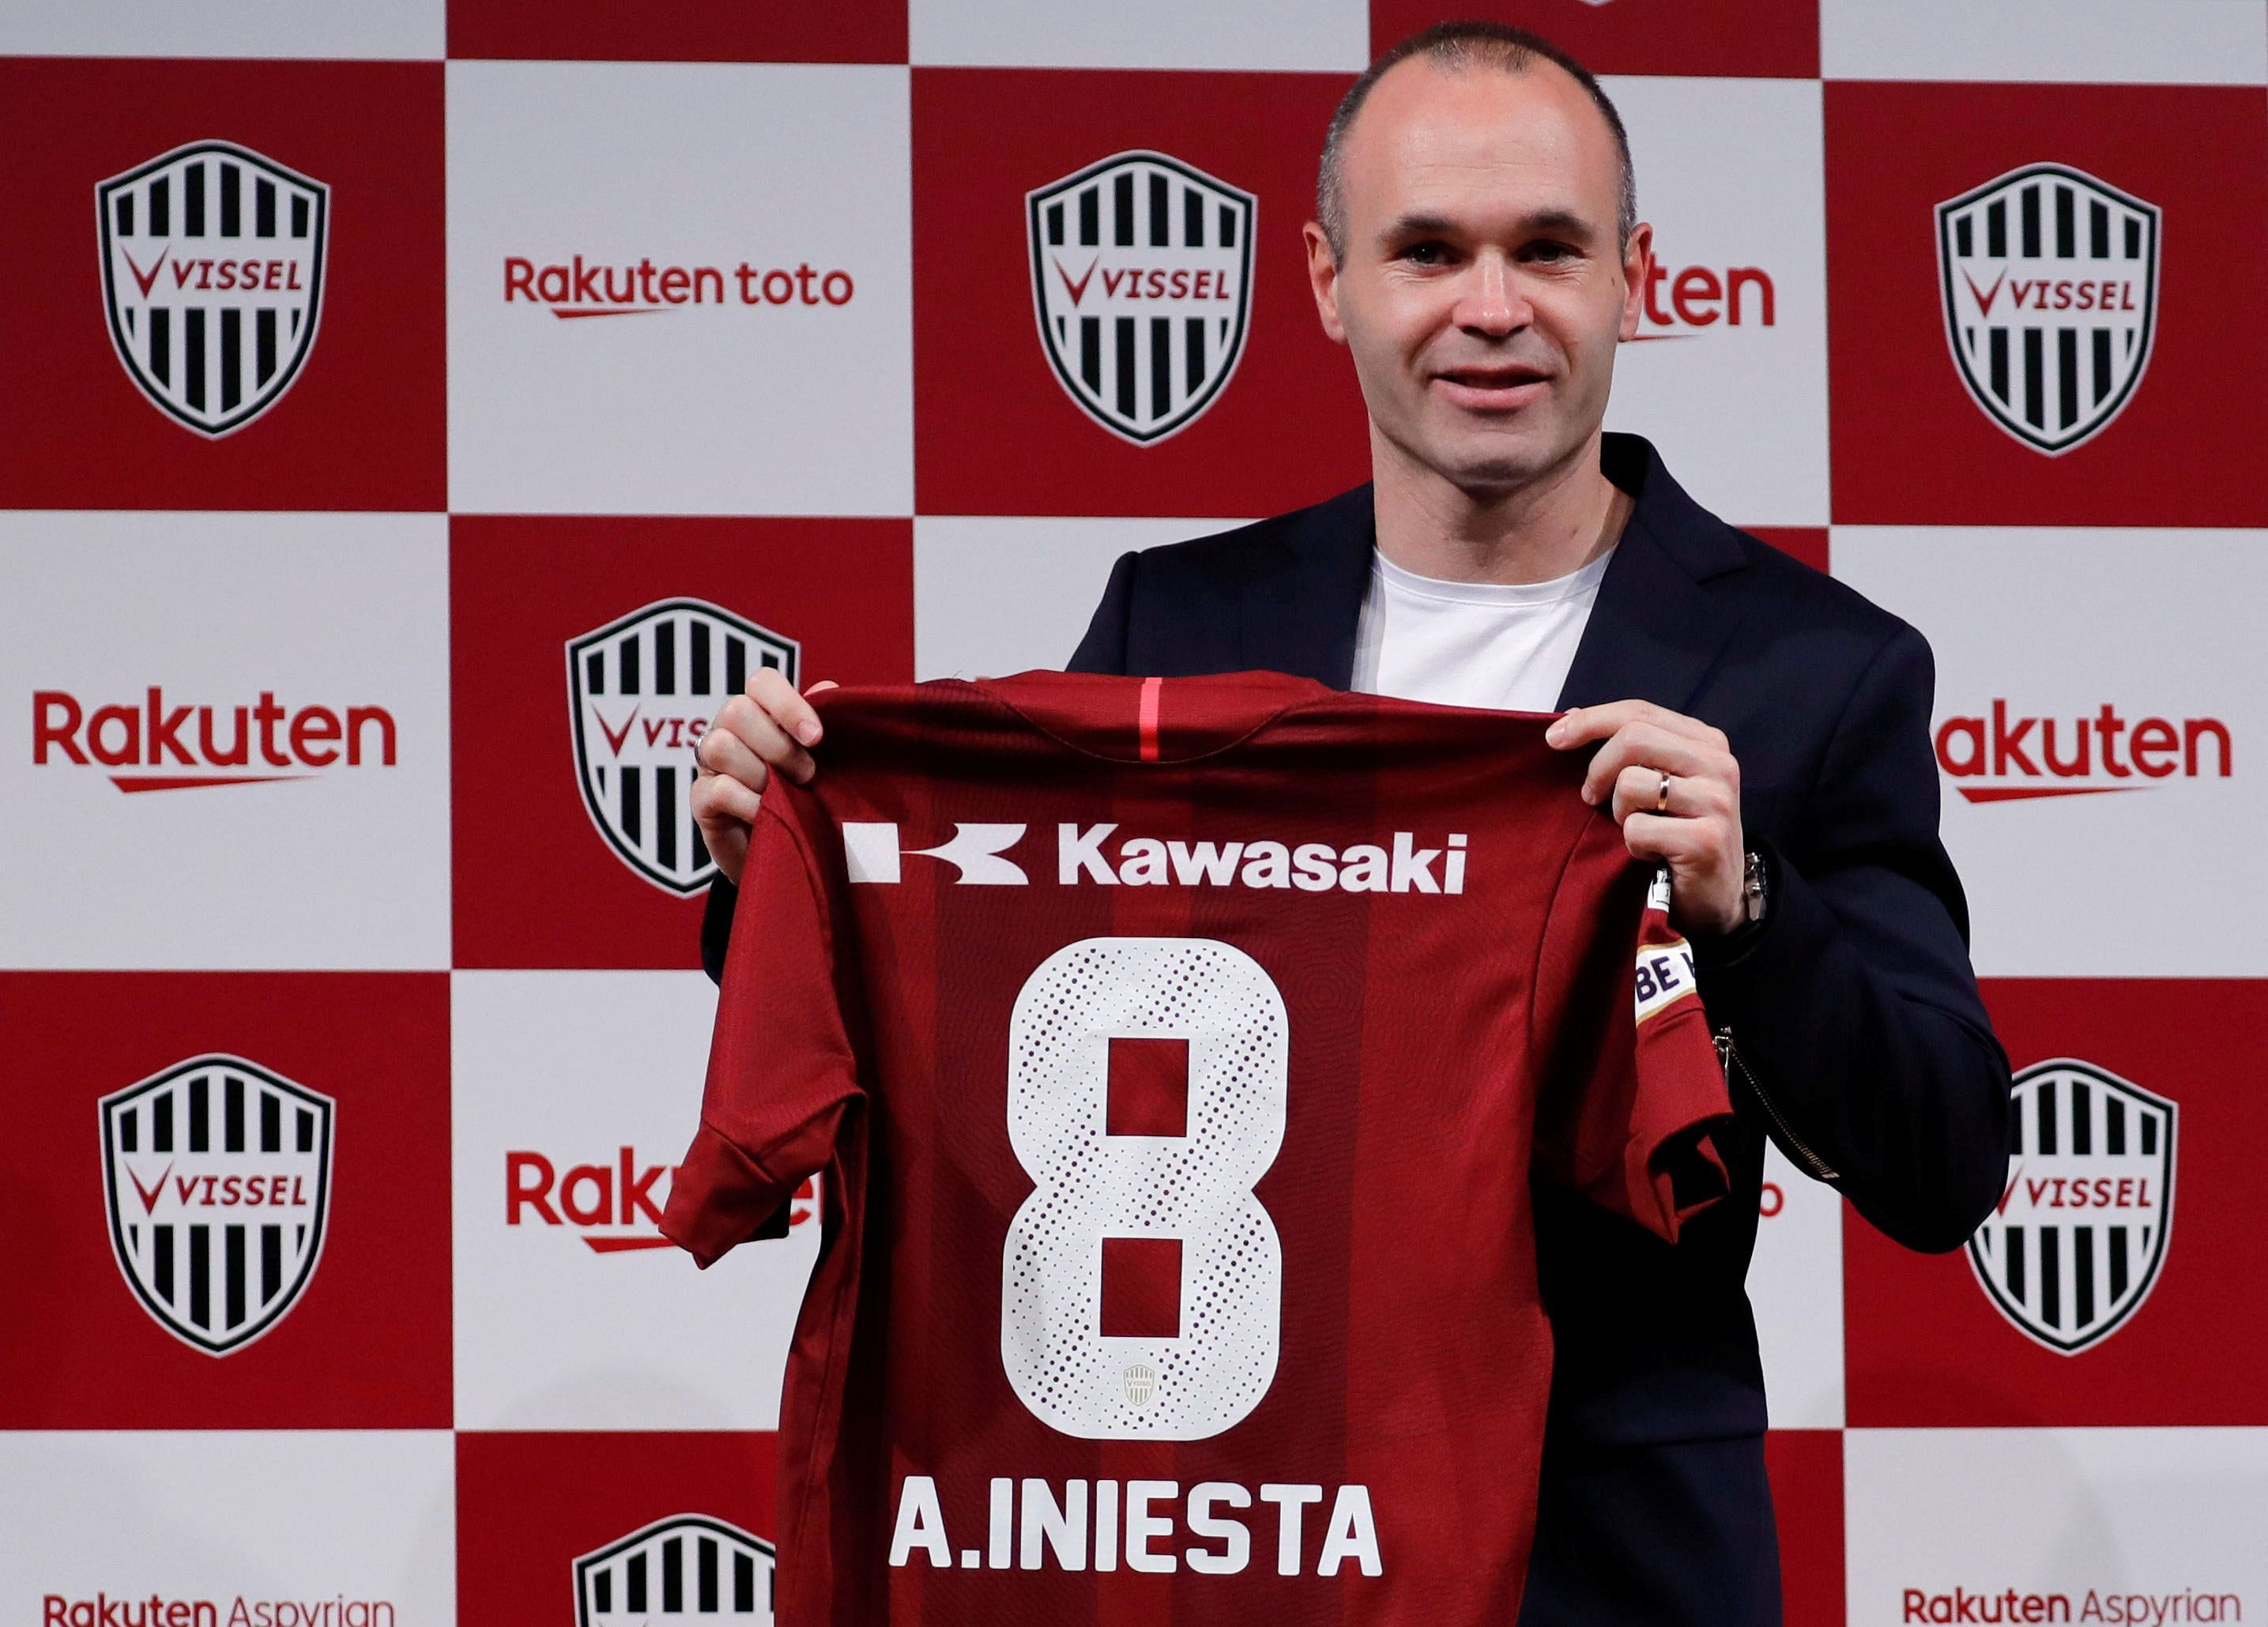 Andres Iniesta with his new jersey after signing for Vissel Kobe in Tokyo.